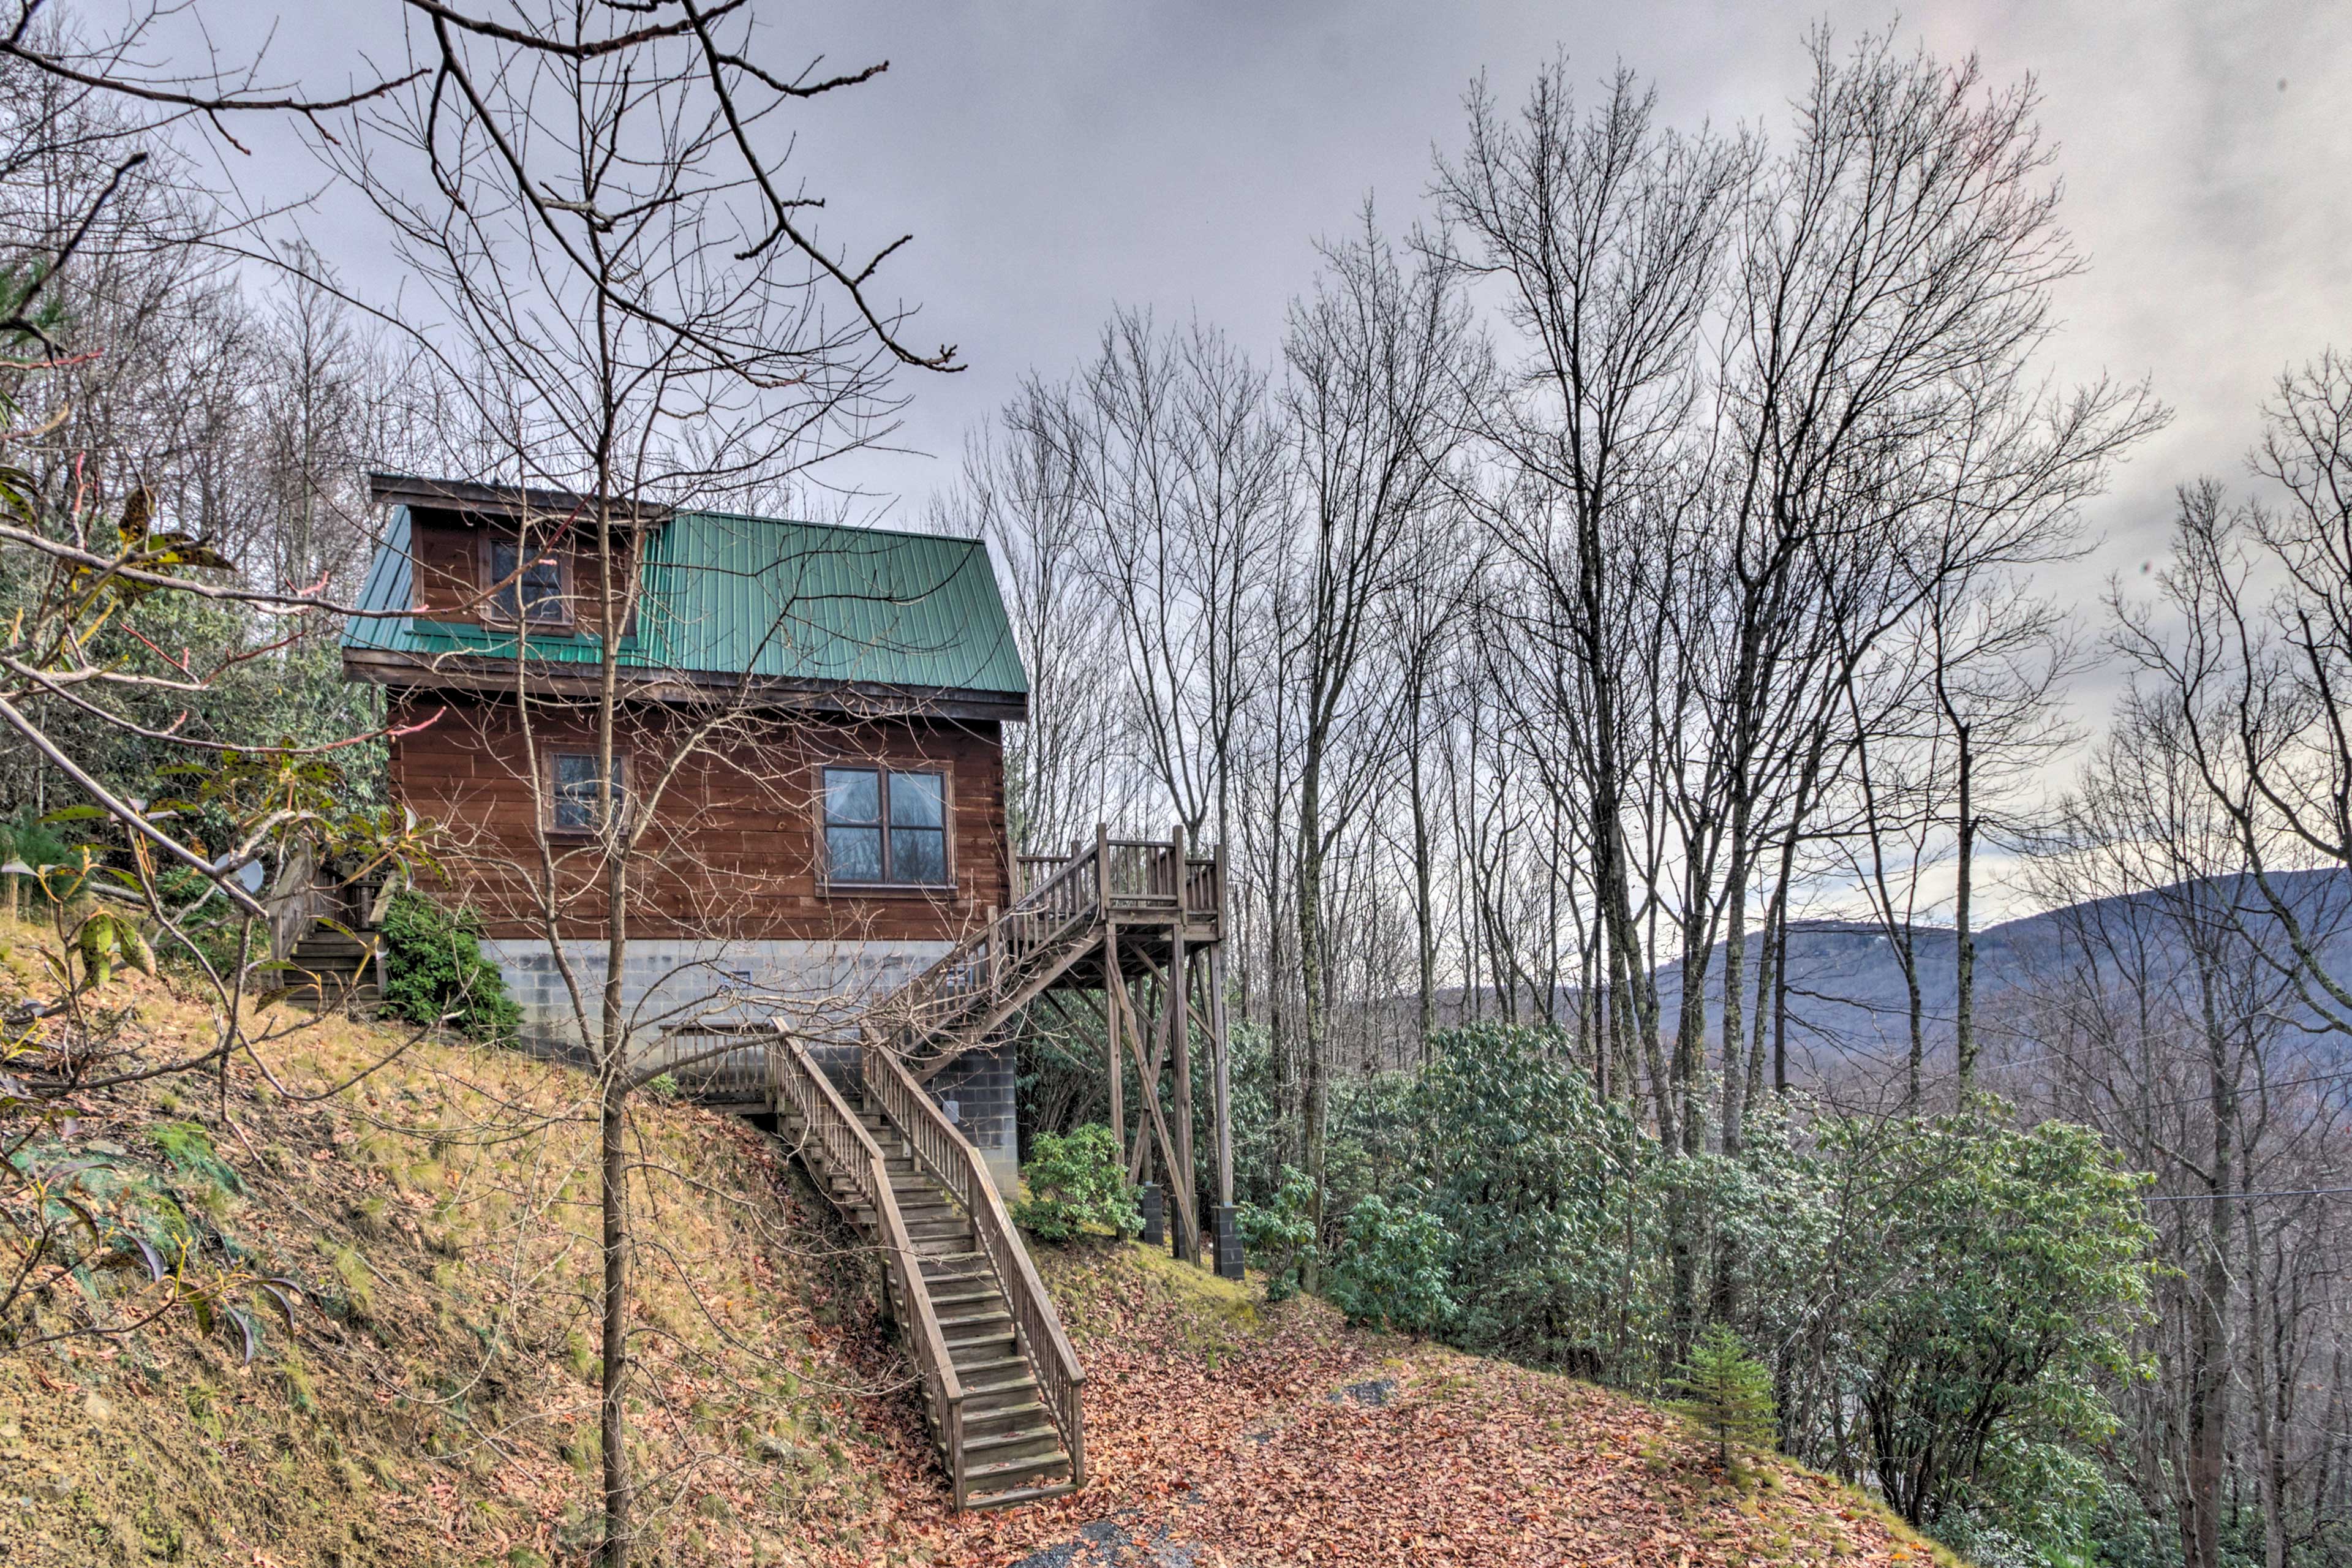 This charming cabin is perched on a hilltop for unforgettable views.